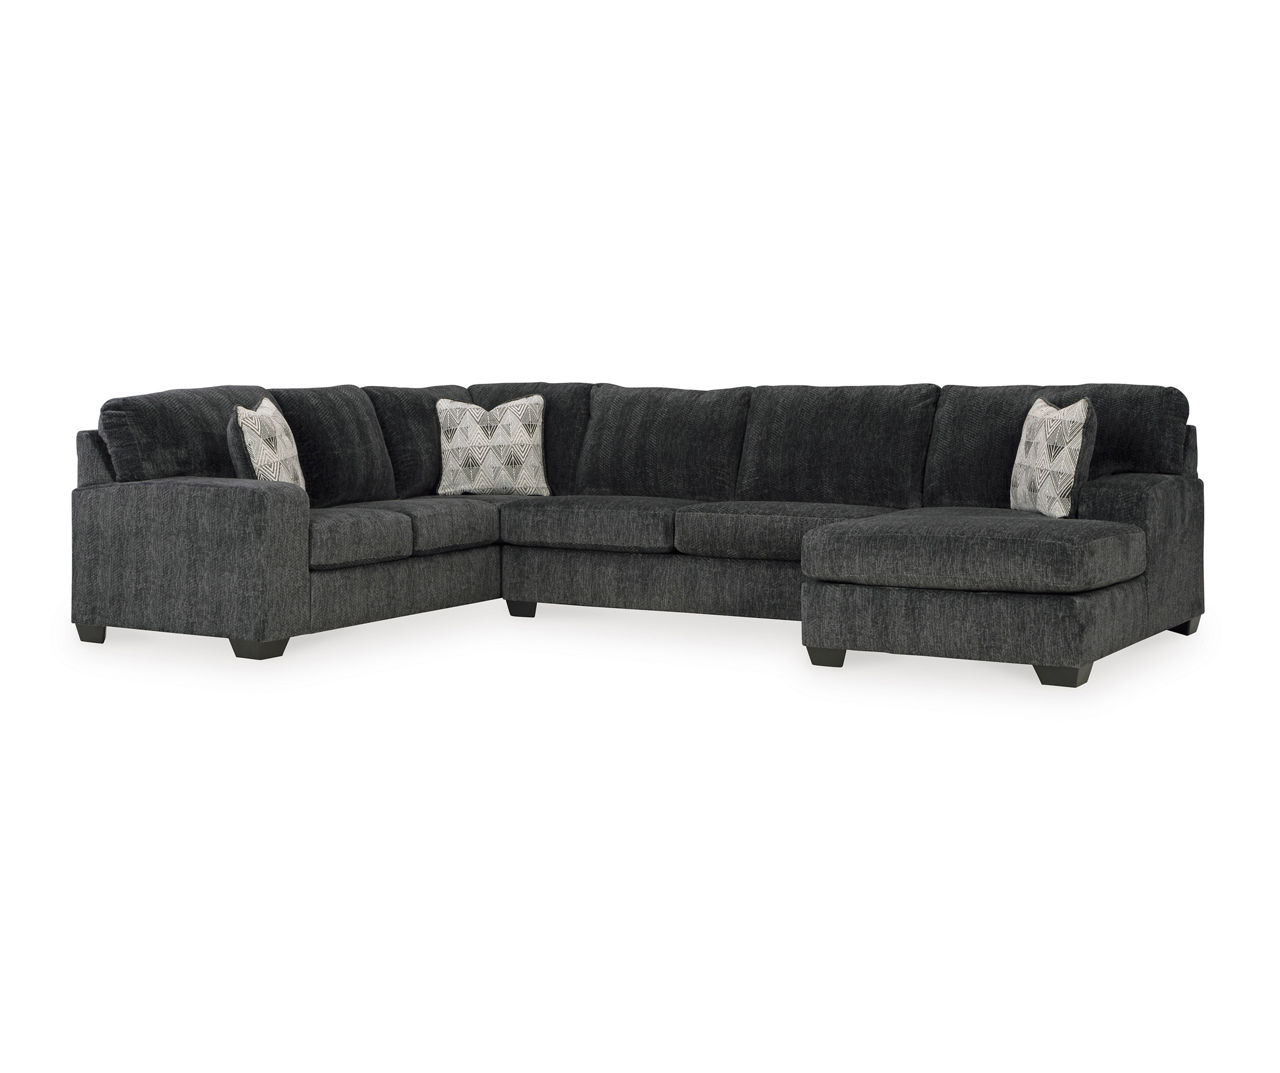 Broyhill Hollyview Shadow 3 Piece Sectional Big Lots